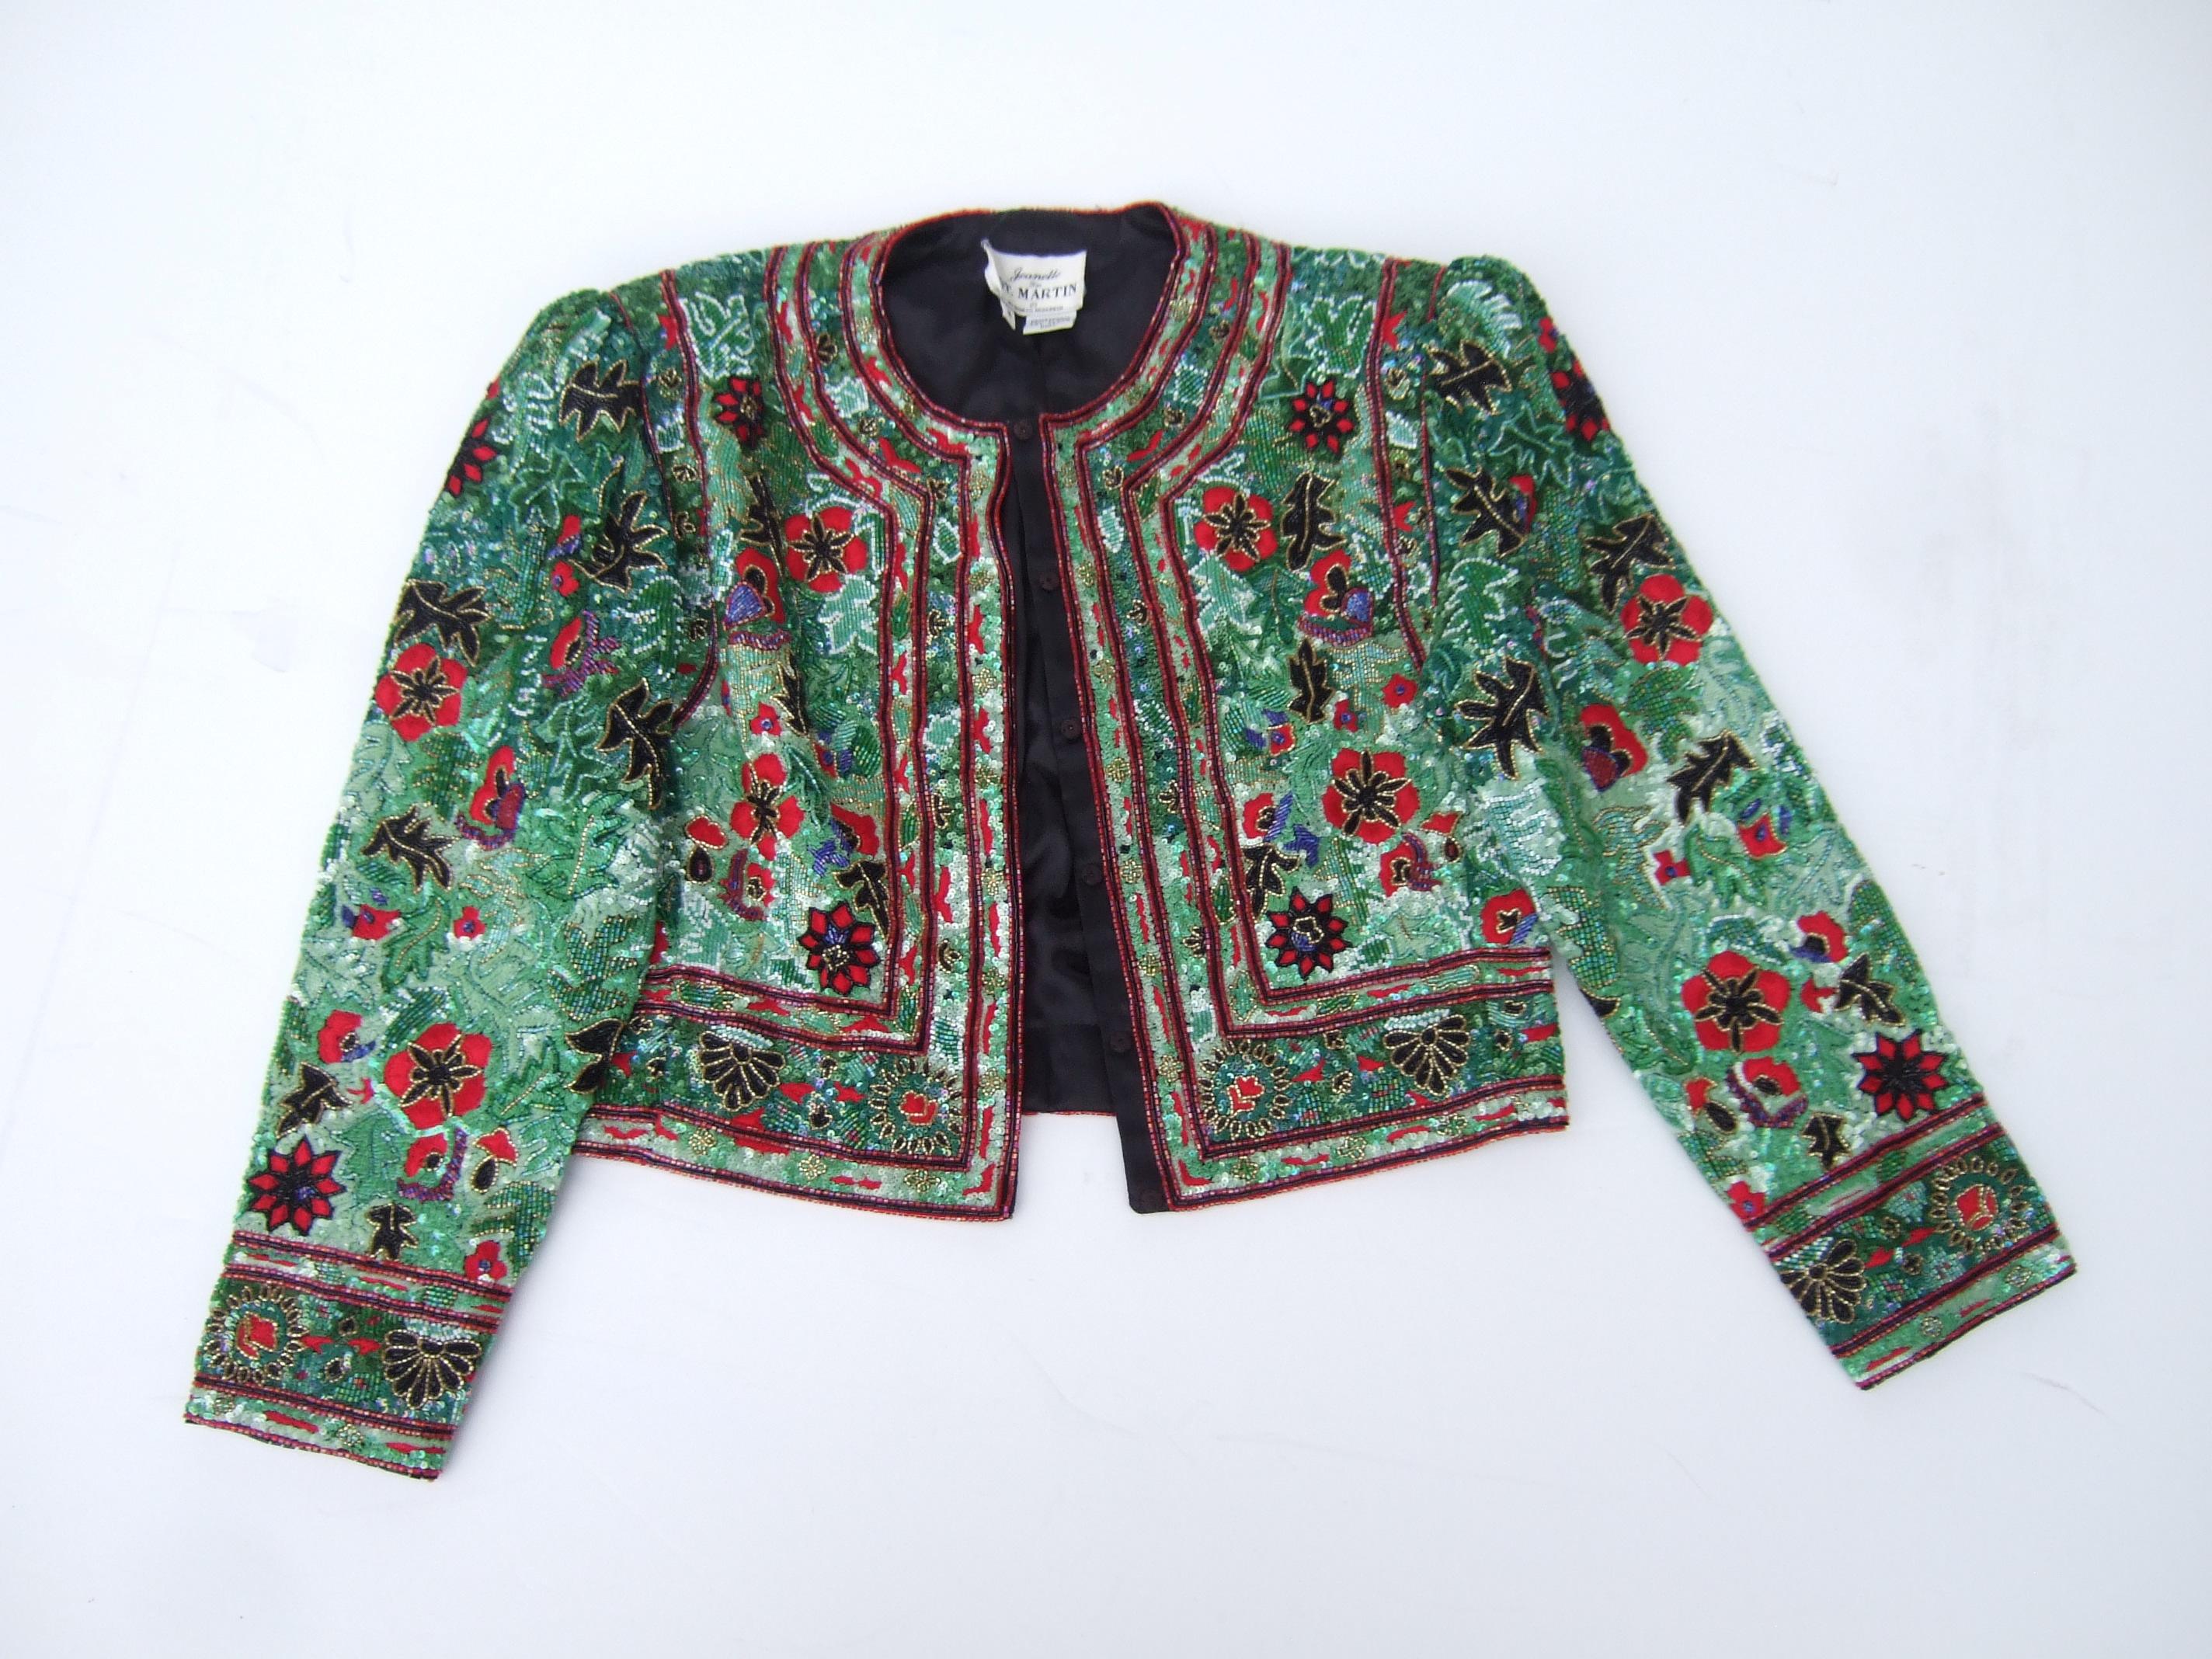 Exquisite Elaborate Glass Floral Beaded Embroidered Bolero Jacket c 1980s For Sale 4